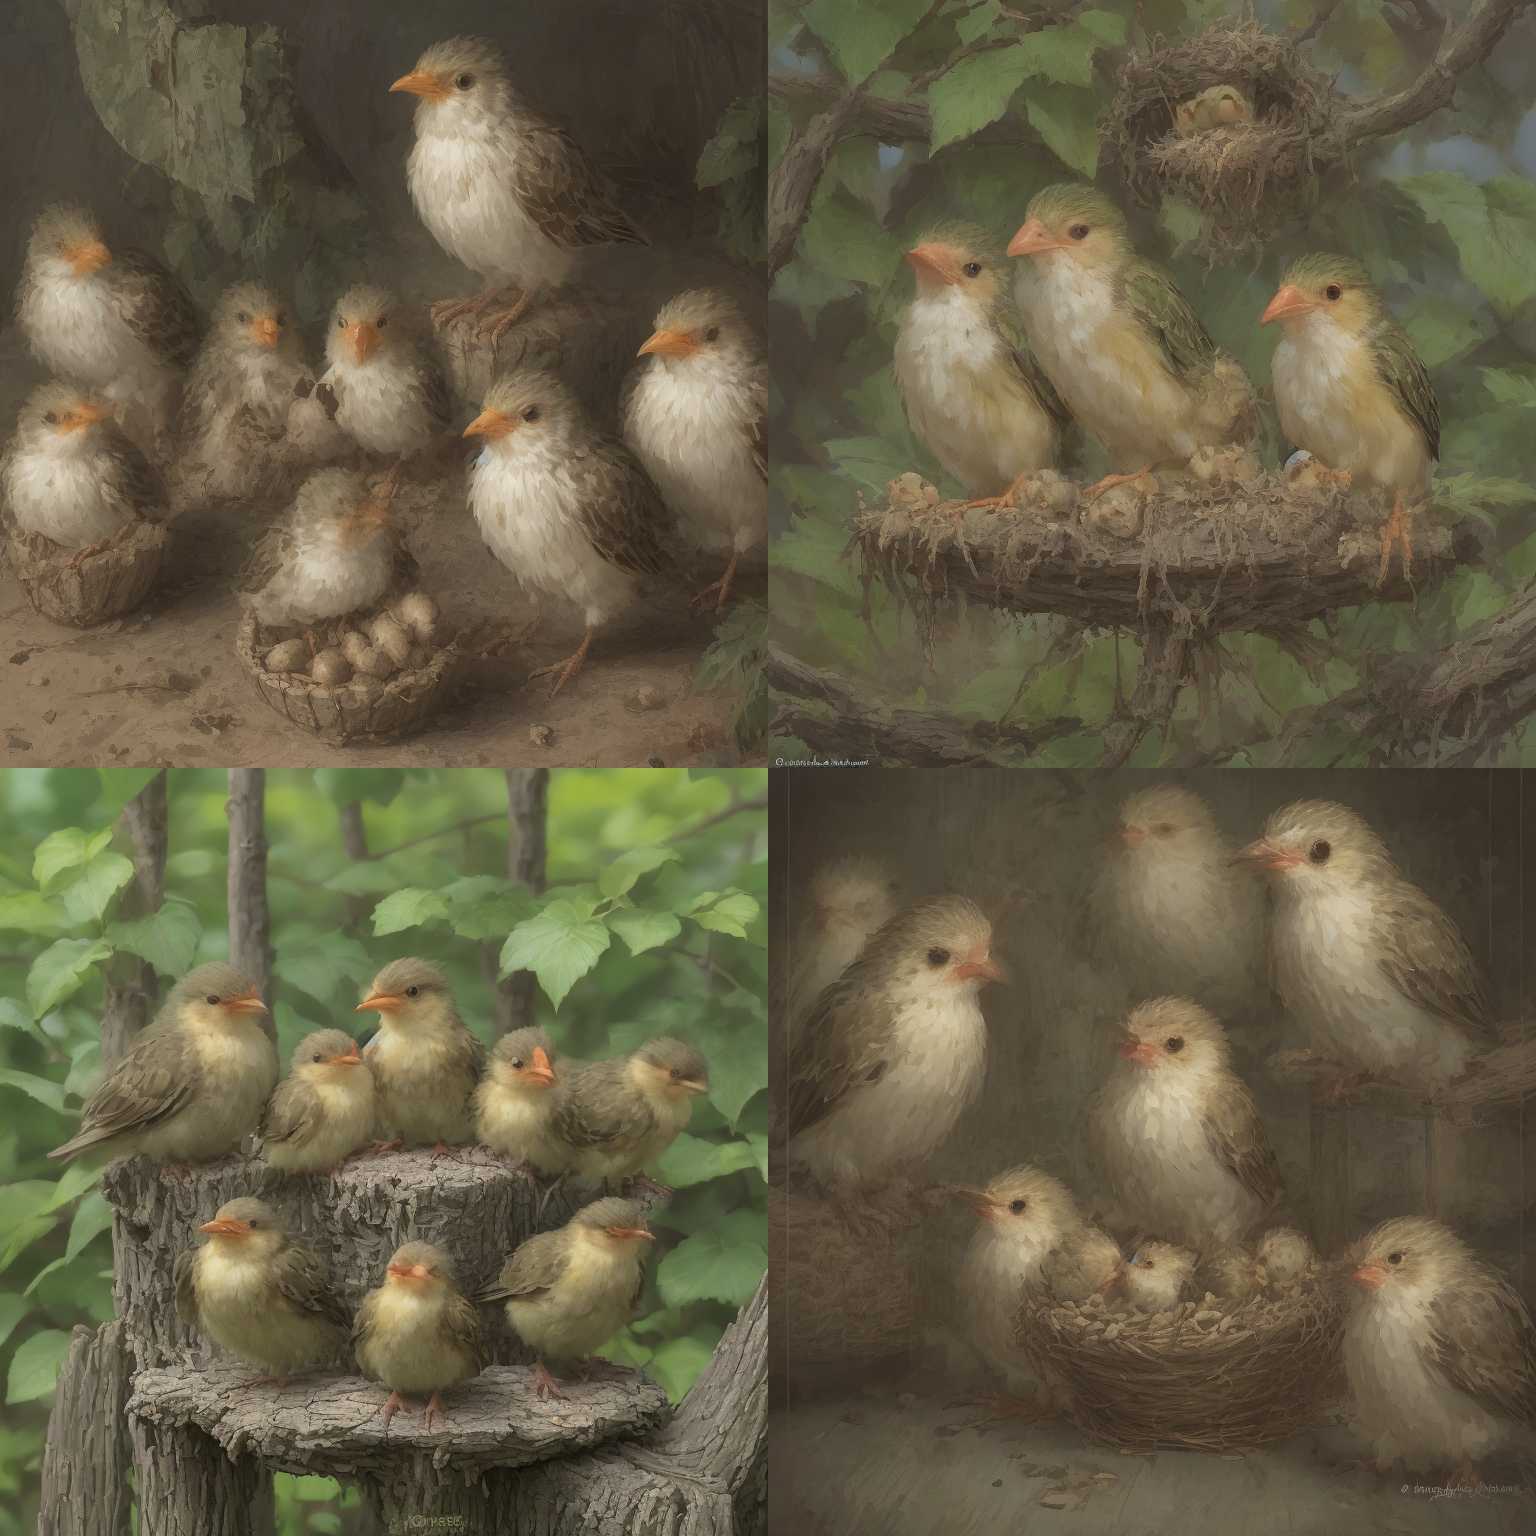 Hungry baby birds